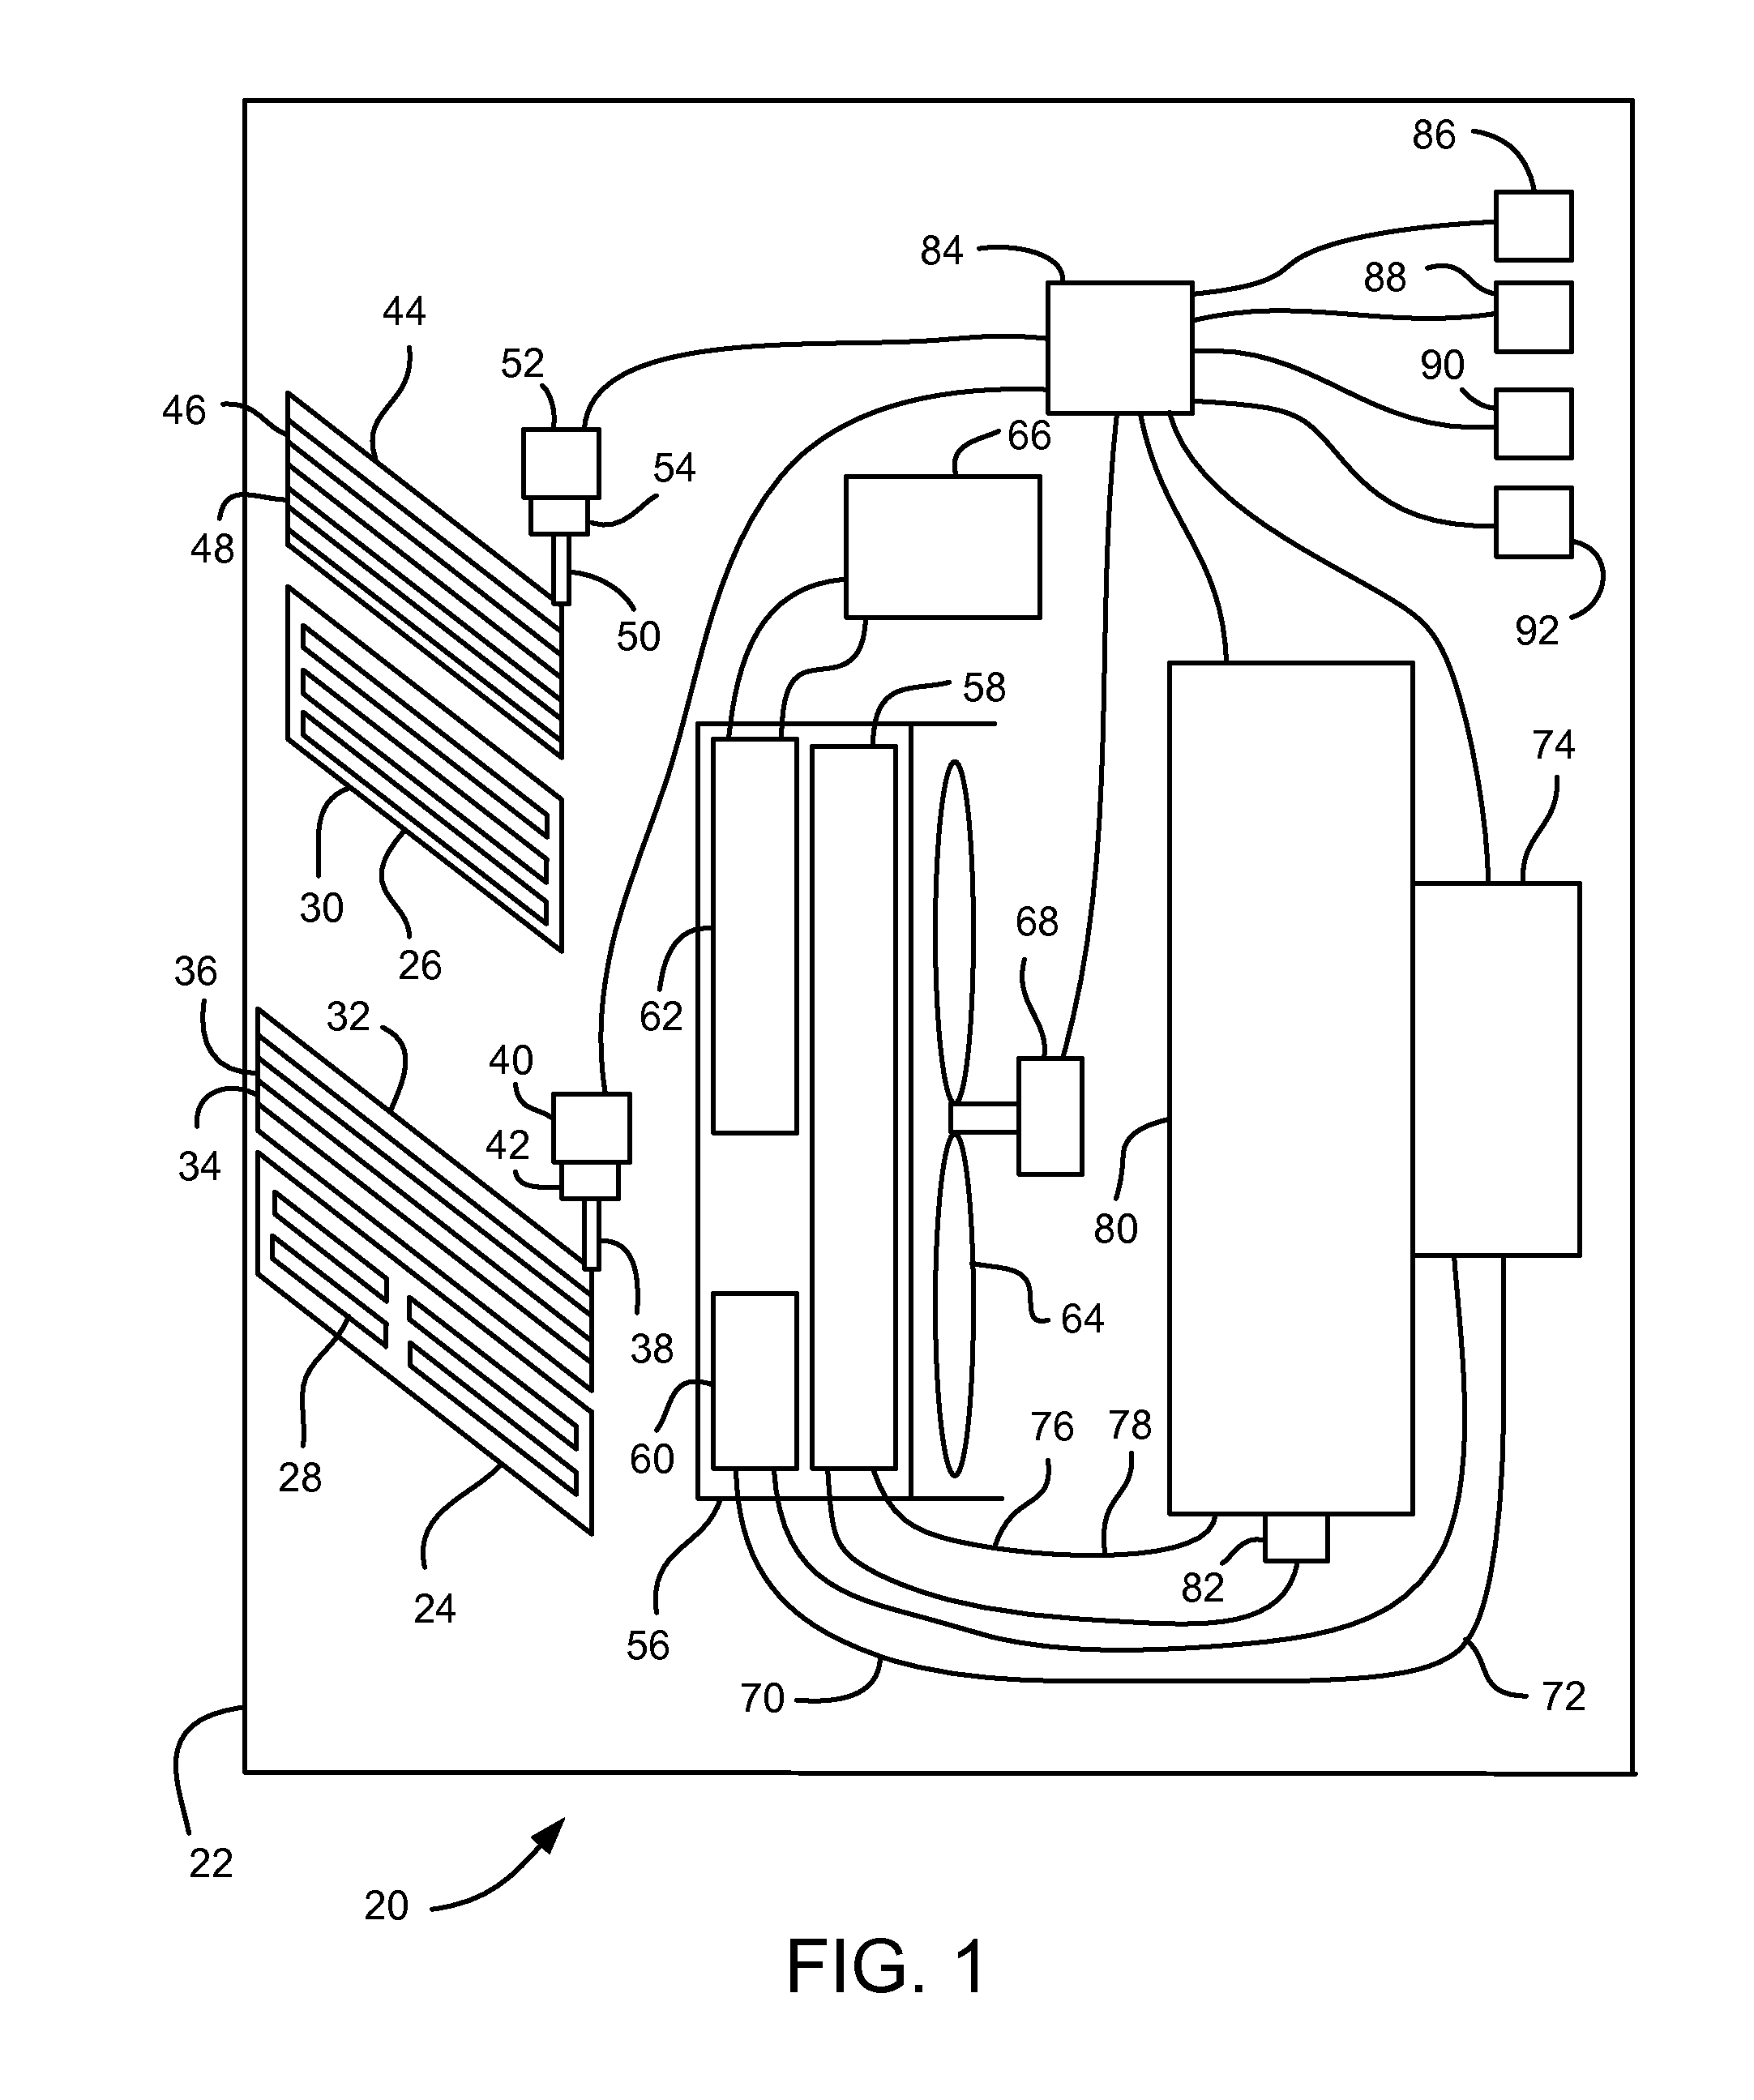 Powertrain Thermal Control with Grille Airflow Shutters